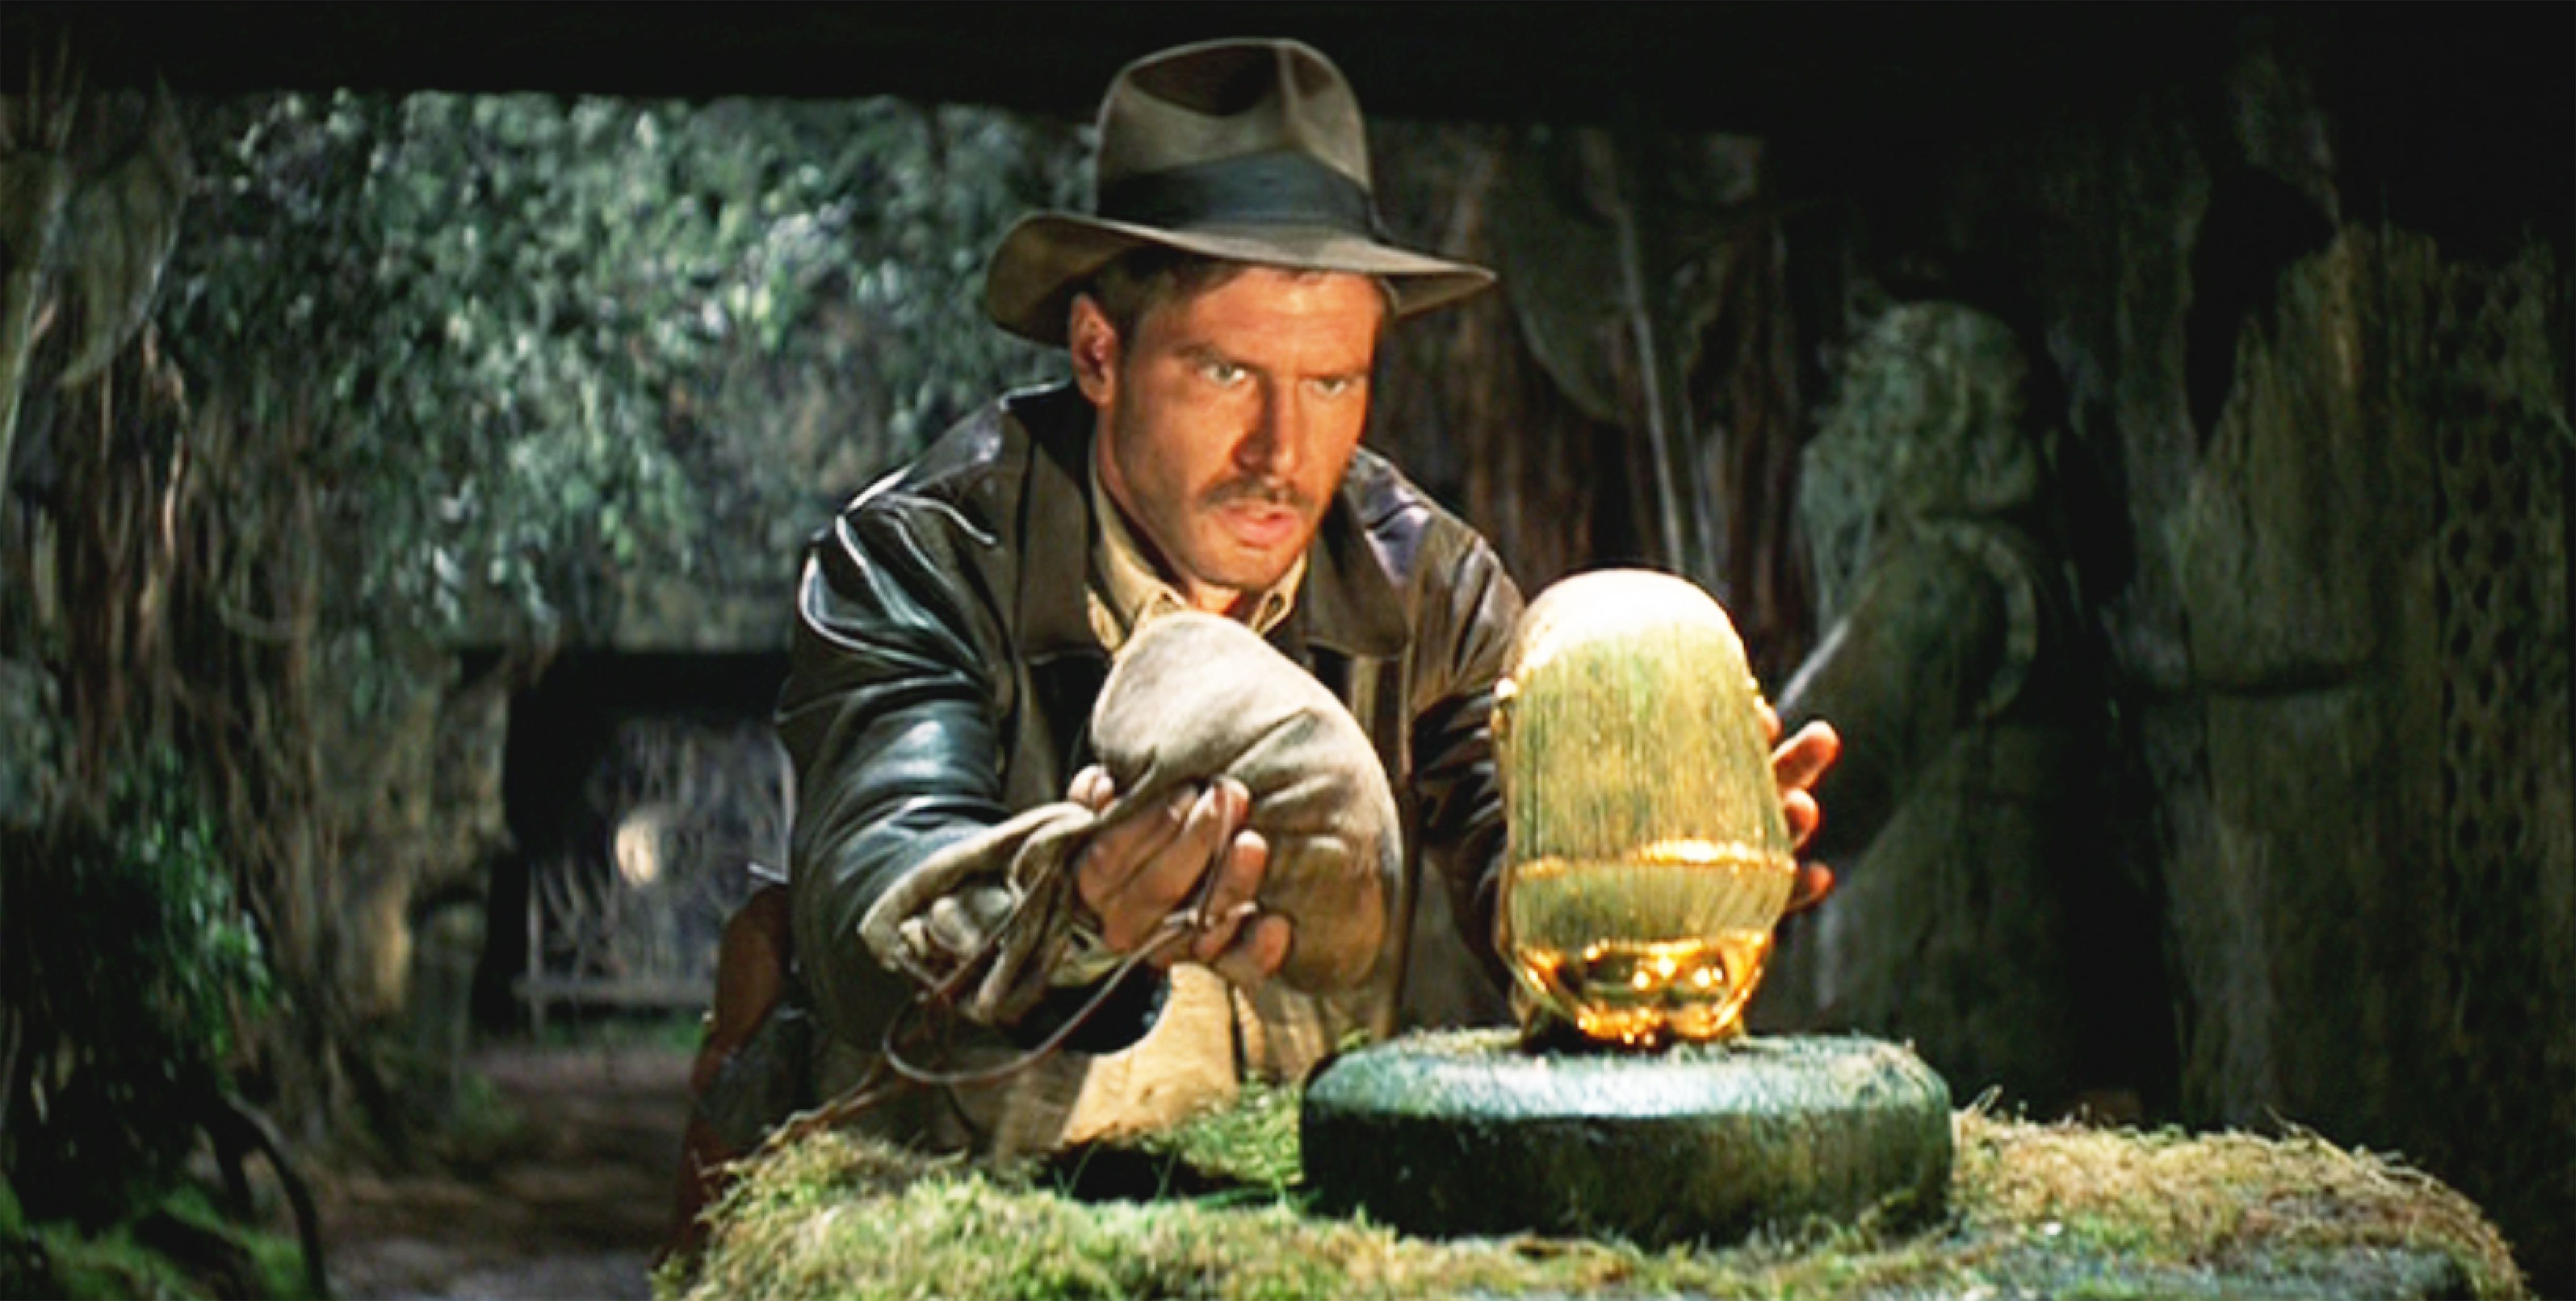 Watch Indiana Jones and the Dial of Destiny